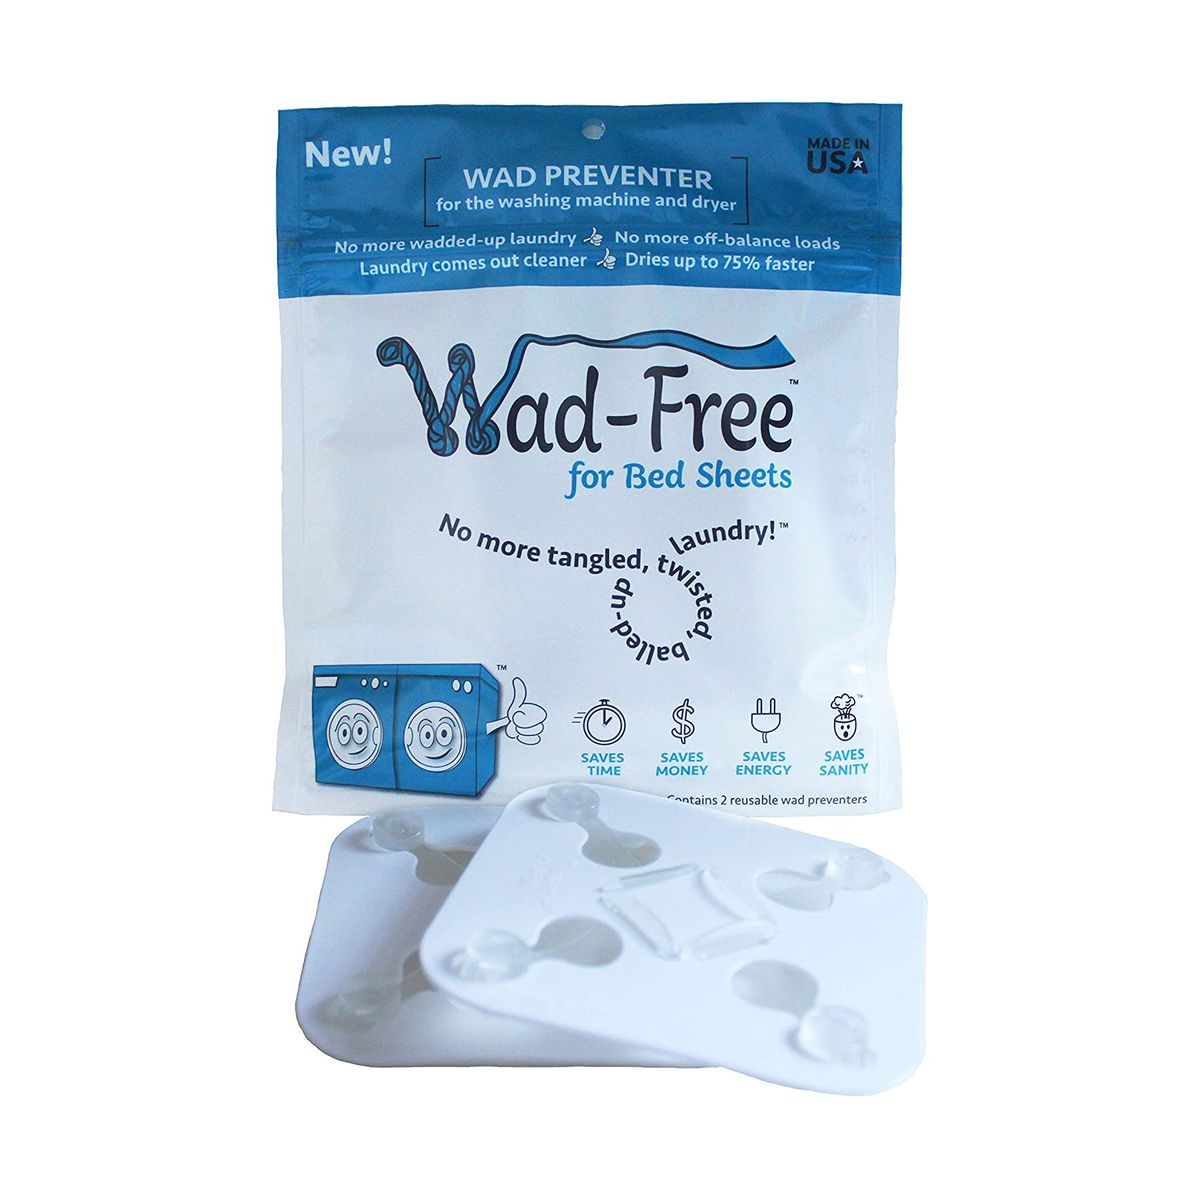 Wad-Free for Bed Sheets